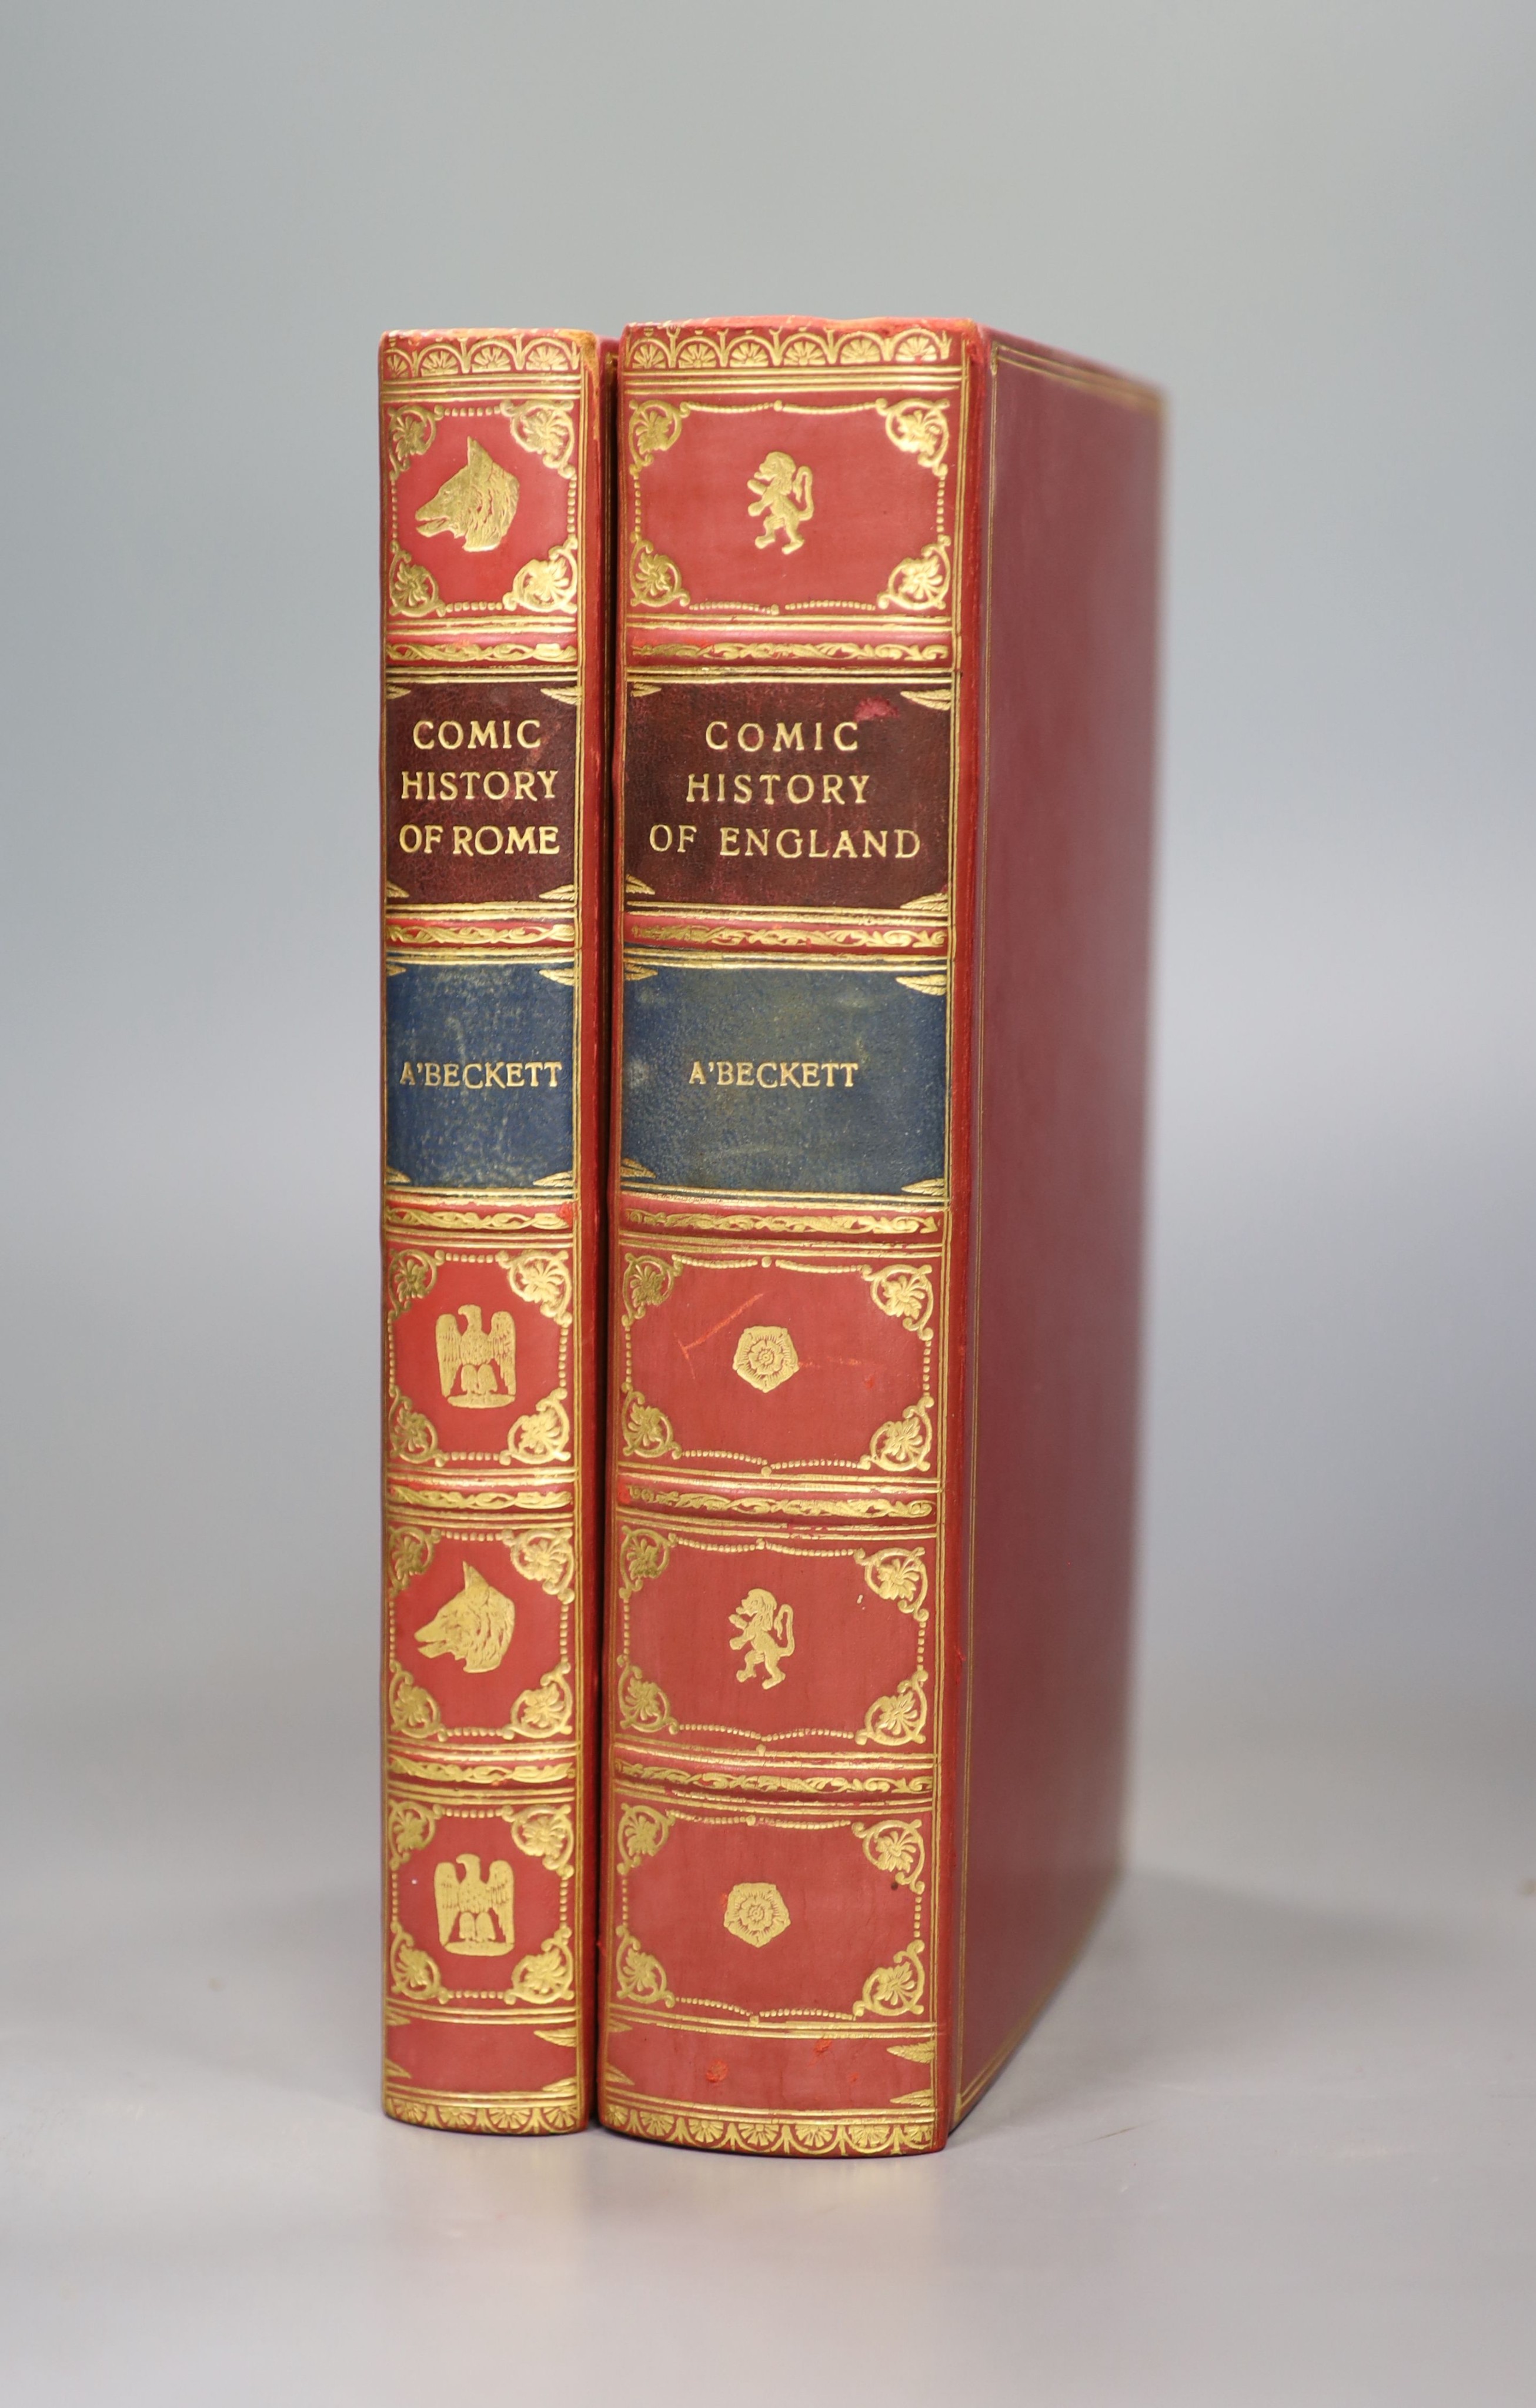 A’Beckett, Gilbert Abbott - The Comic History of England, illustrated by John Leech, with 20 hand-coloured plates, and The Comic History of Rome, with 10 hand-coloured plates, some with spotting, 8vo, uniformly bound, re